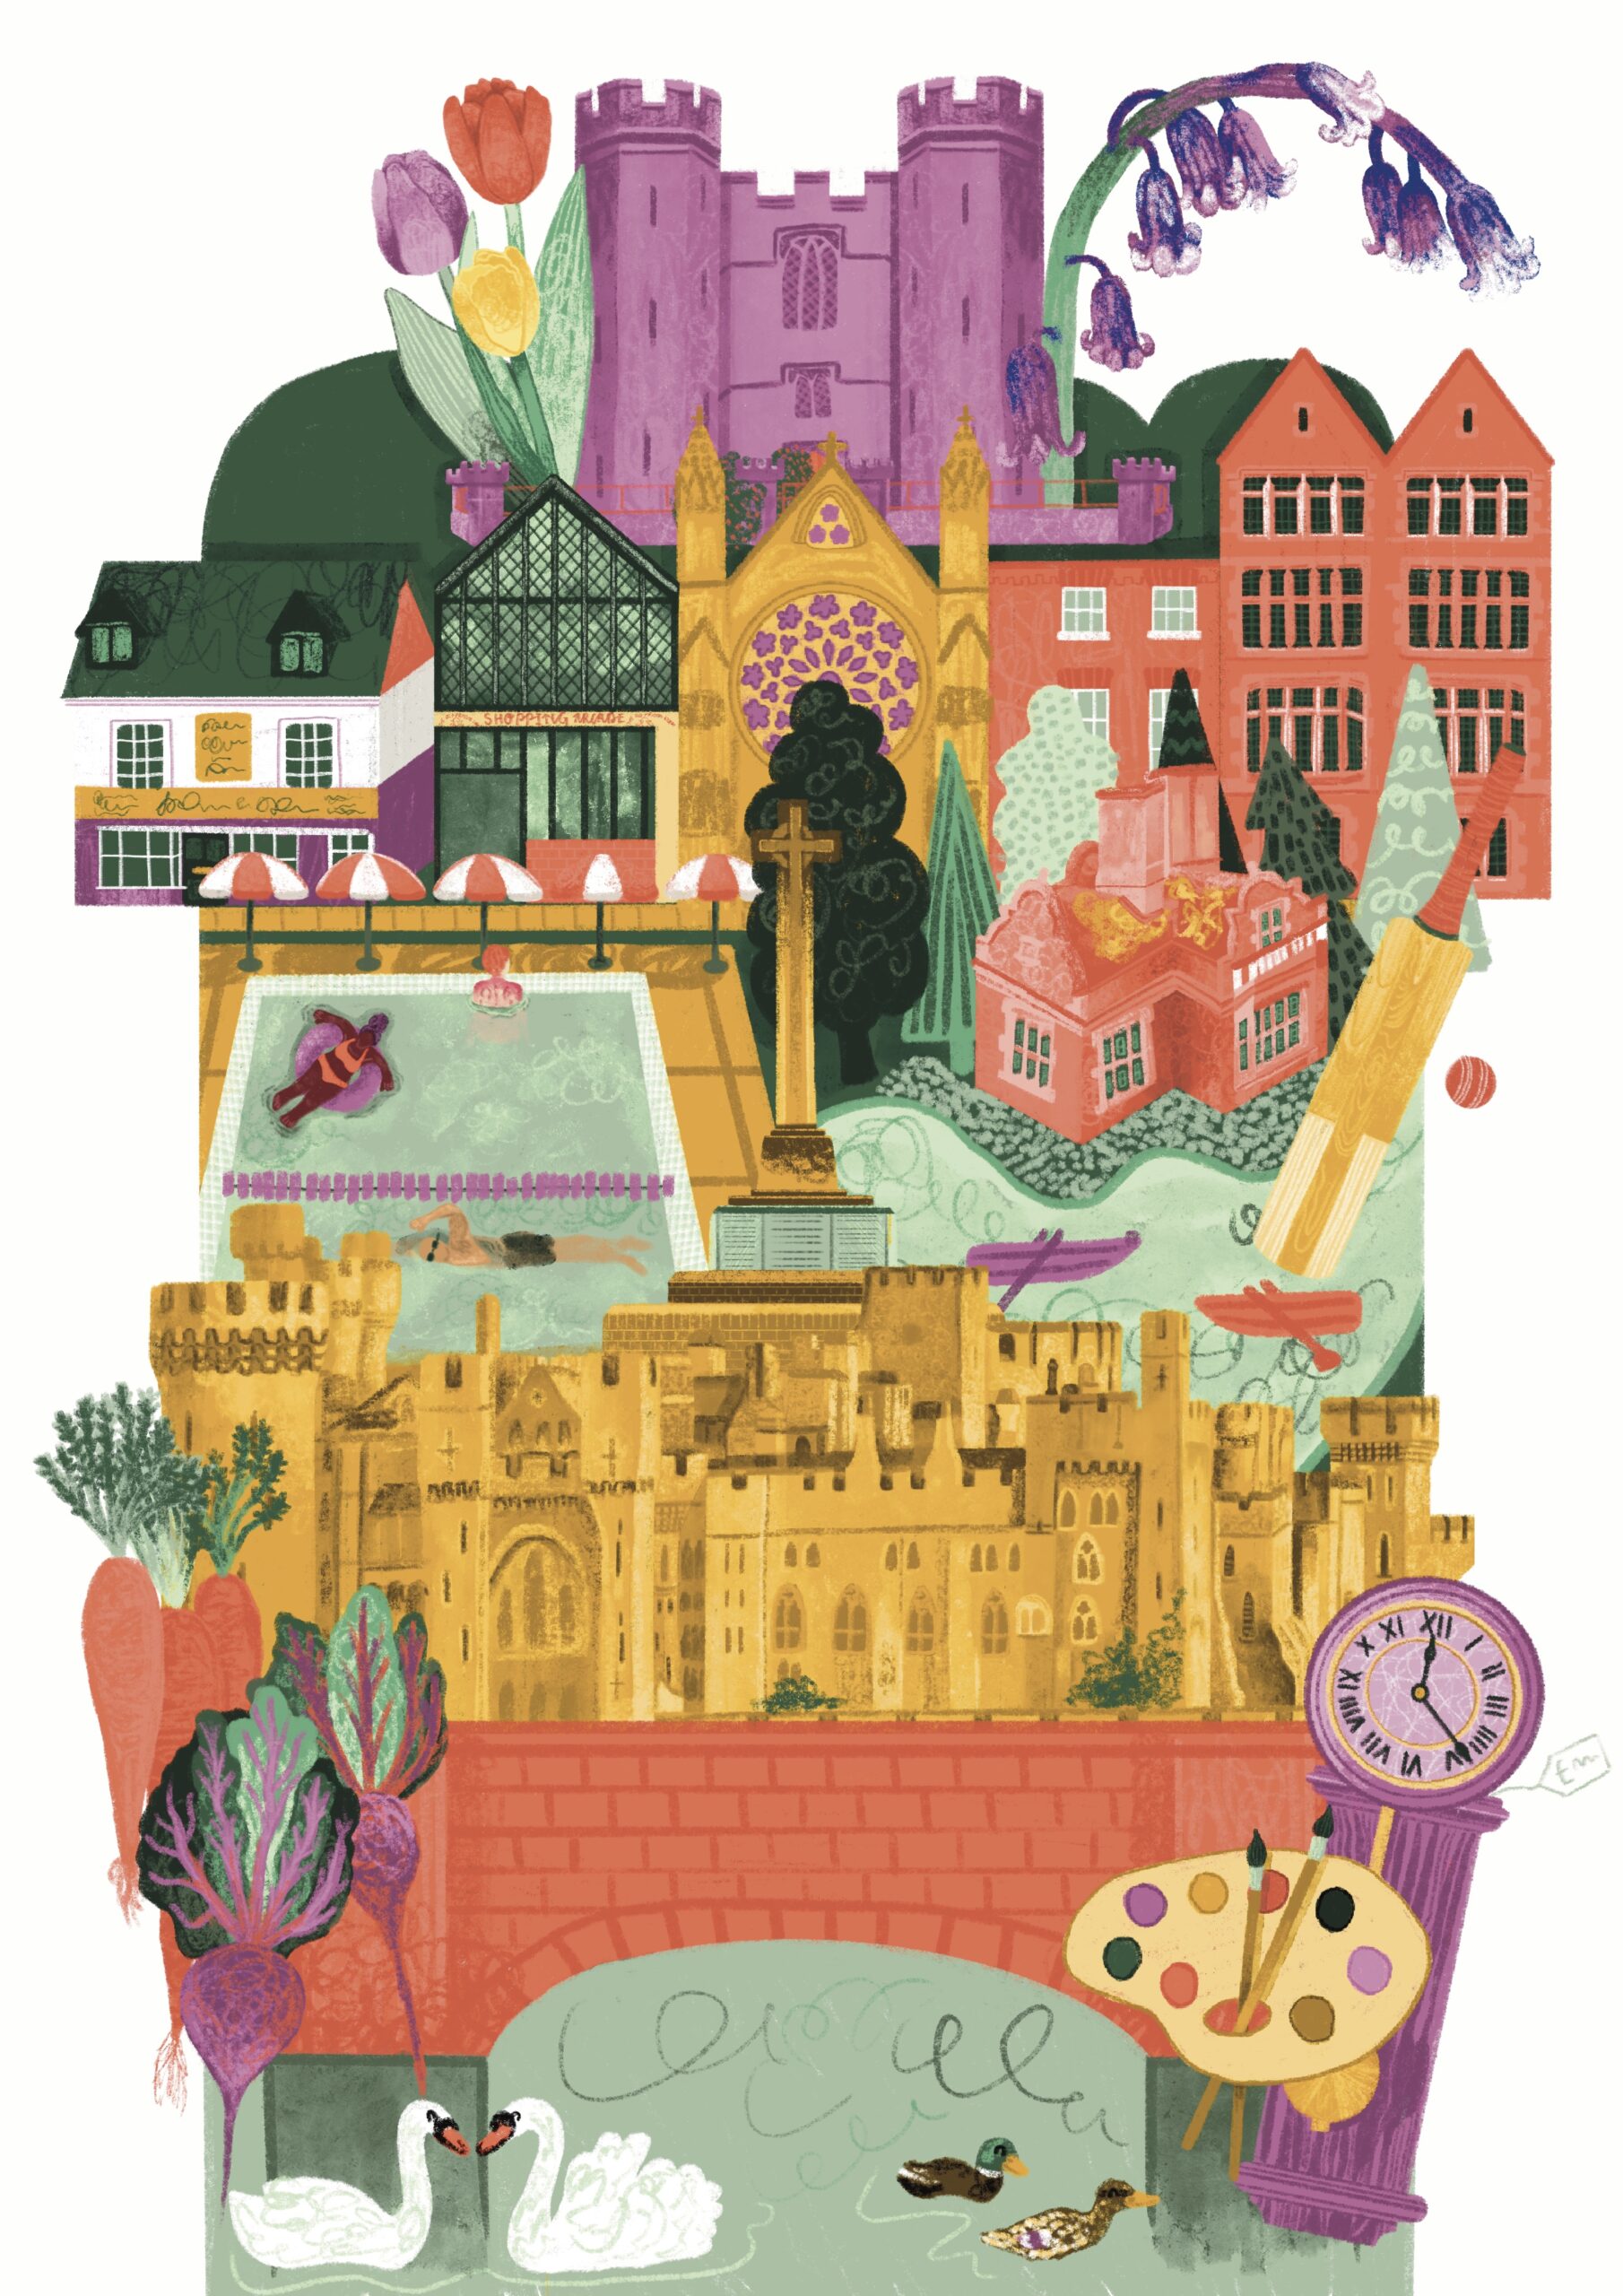 An bright coloured illustration inspired by some of Arundel's finest buildings and businesses - lots of lilac, oranges and sage/khaki greens!